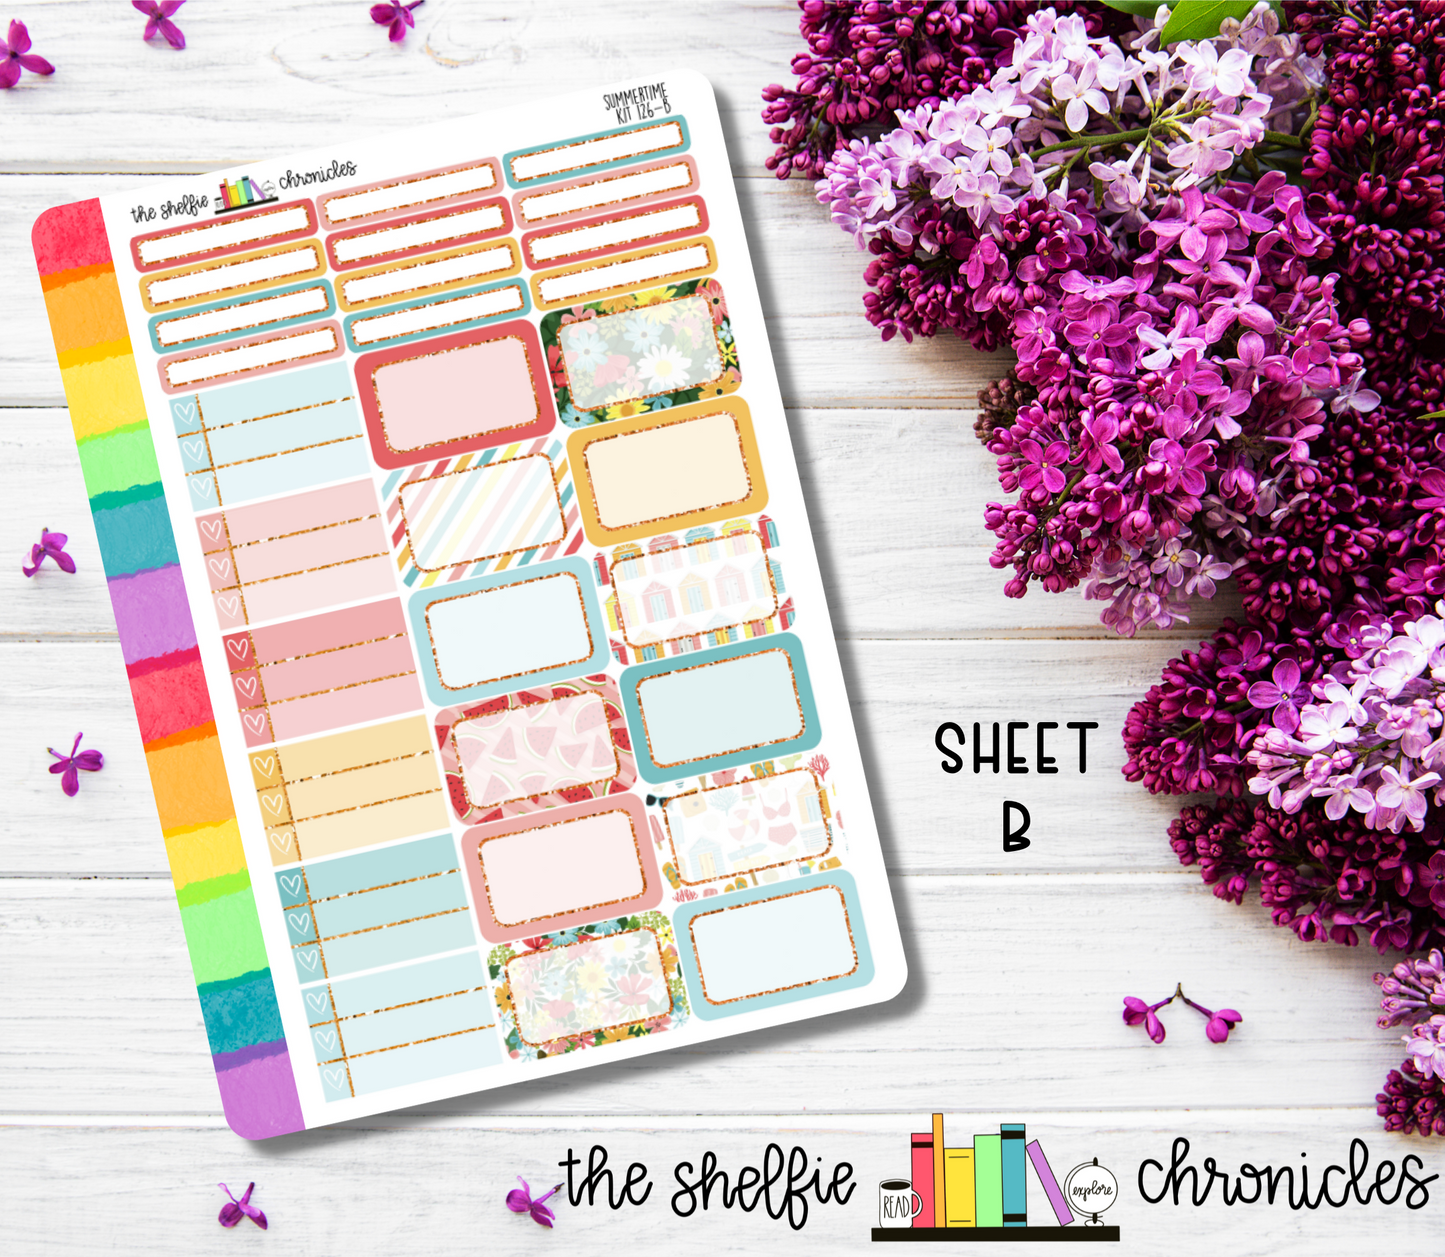 Kit 126 - Summertime Weekly Kit - Die Cut Stickers - Repositionable Paper - Made To Fit 7x9 Planners